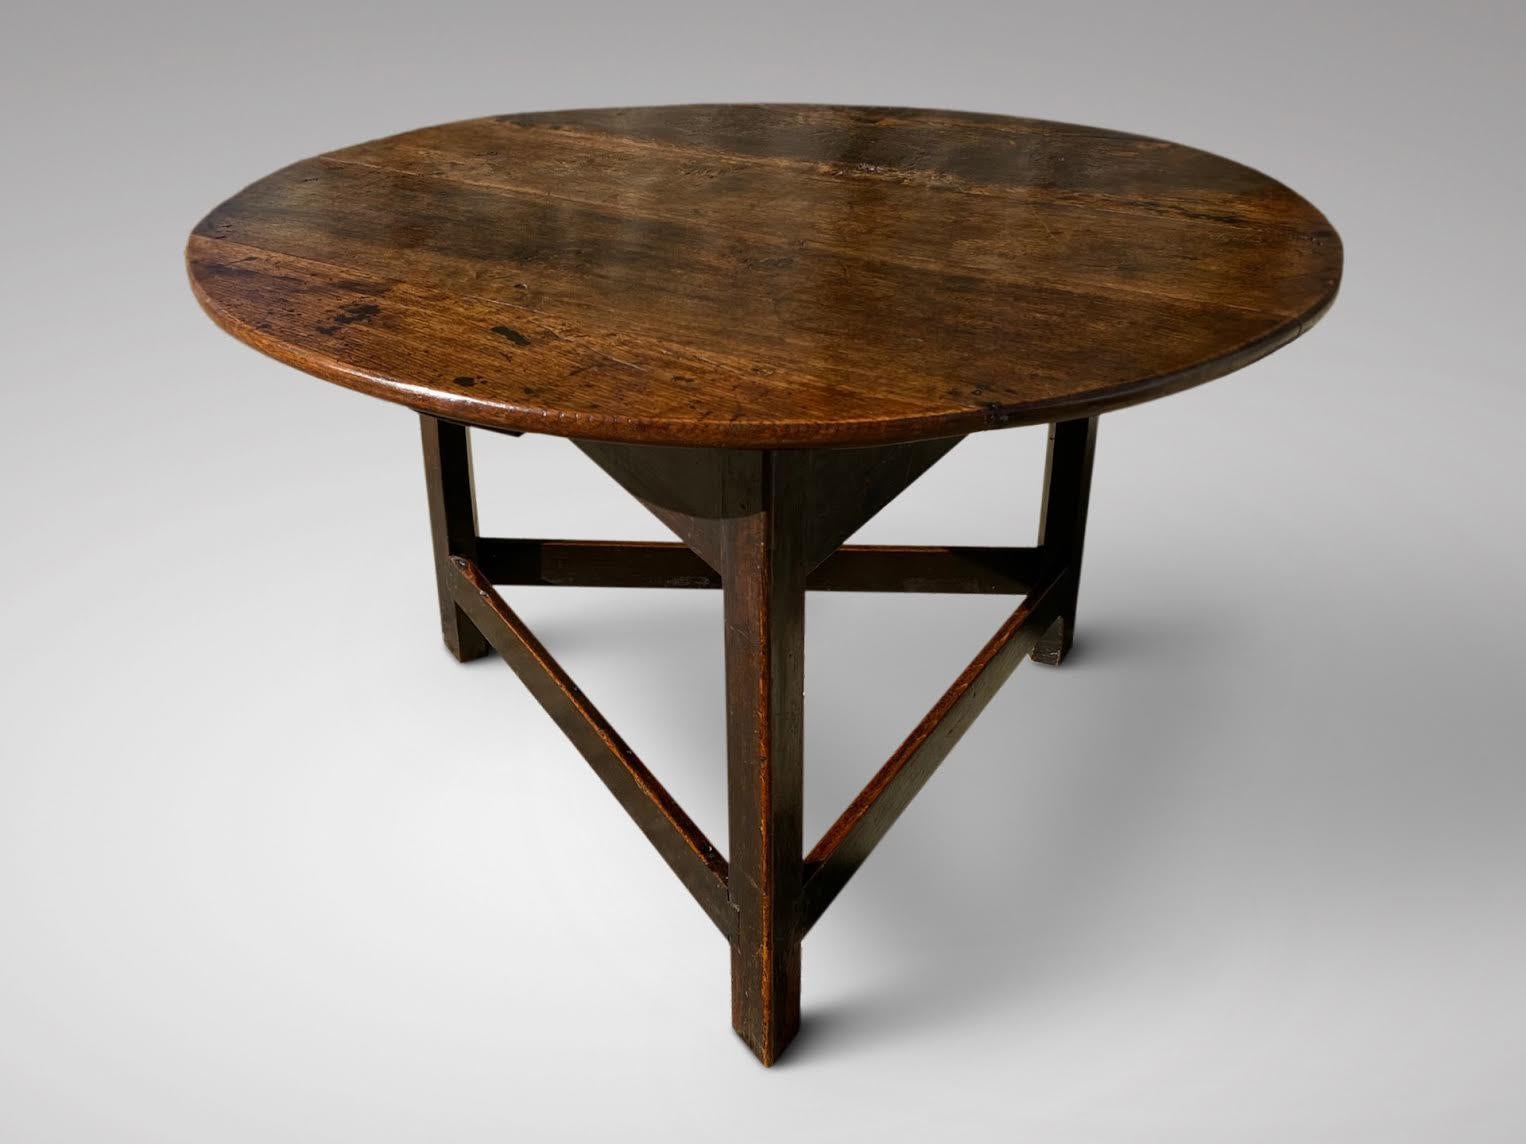 We are delighted to offer for sale this larger than usual and more robust model of an 18th century Georgian antique cricket table made in solid oak with thick top. With a wonderful patina and original colour. All pegged construction and with a